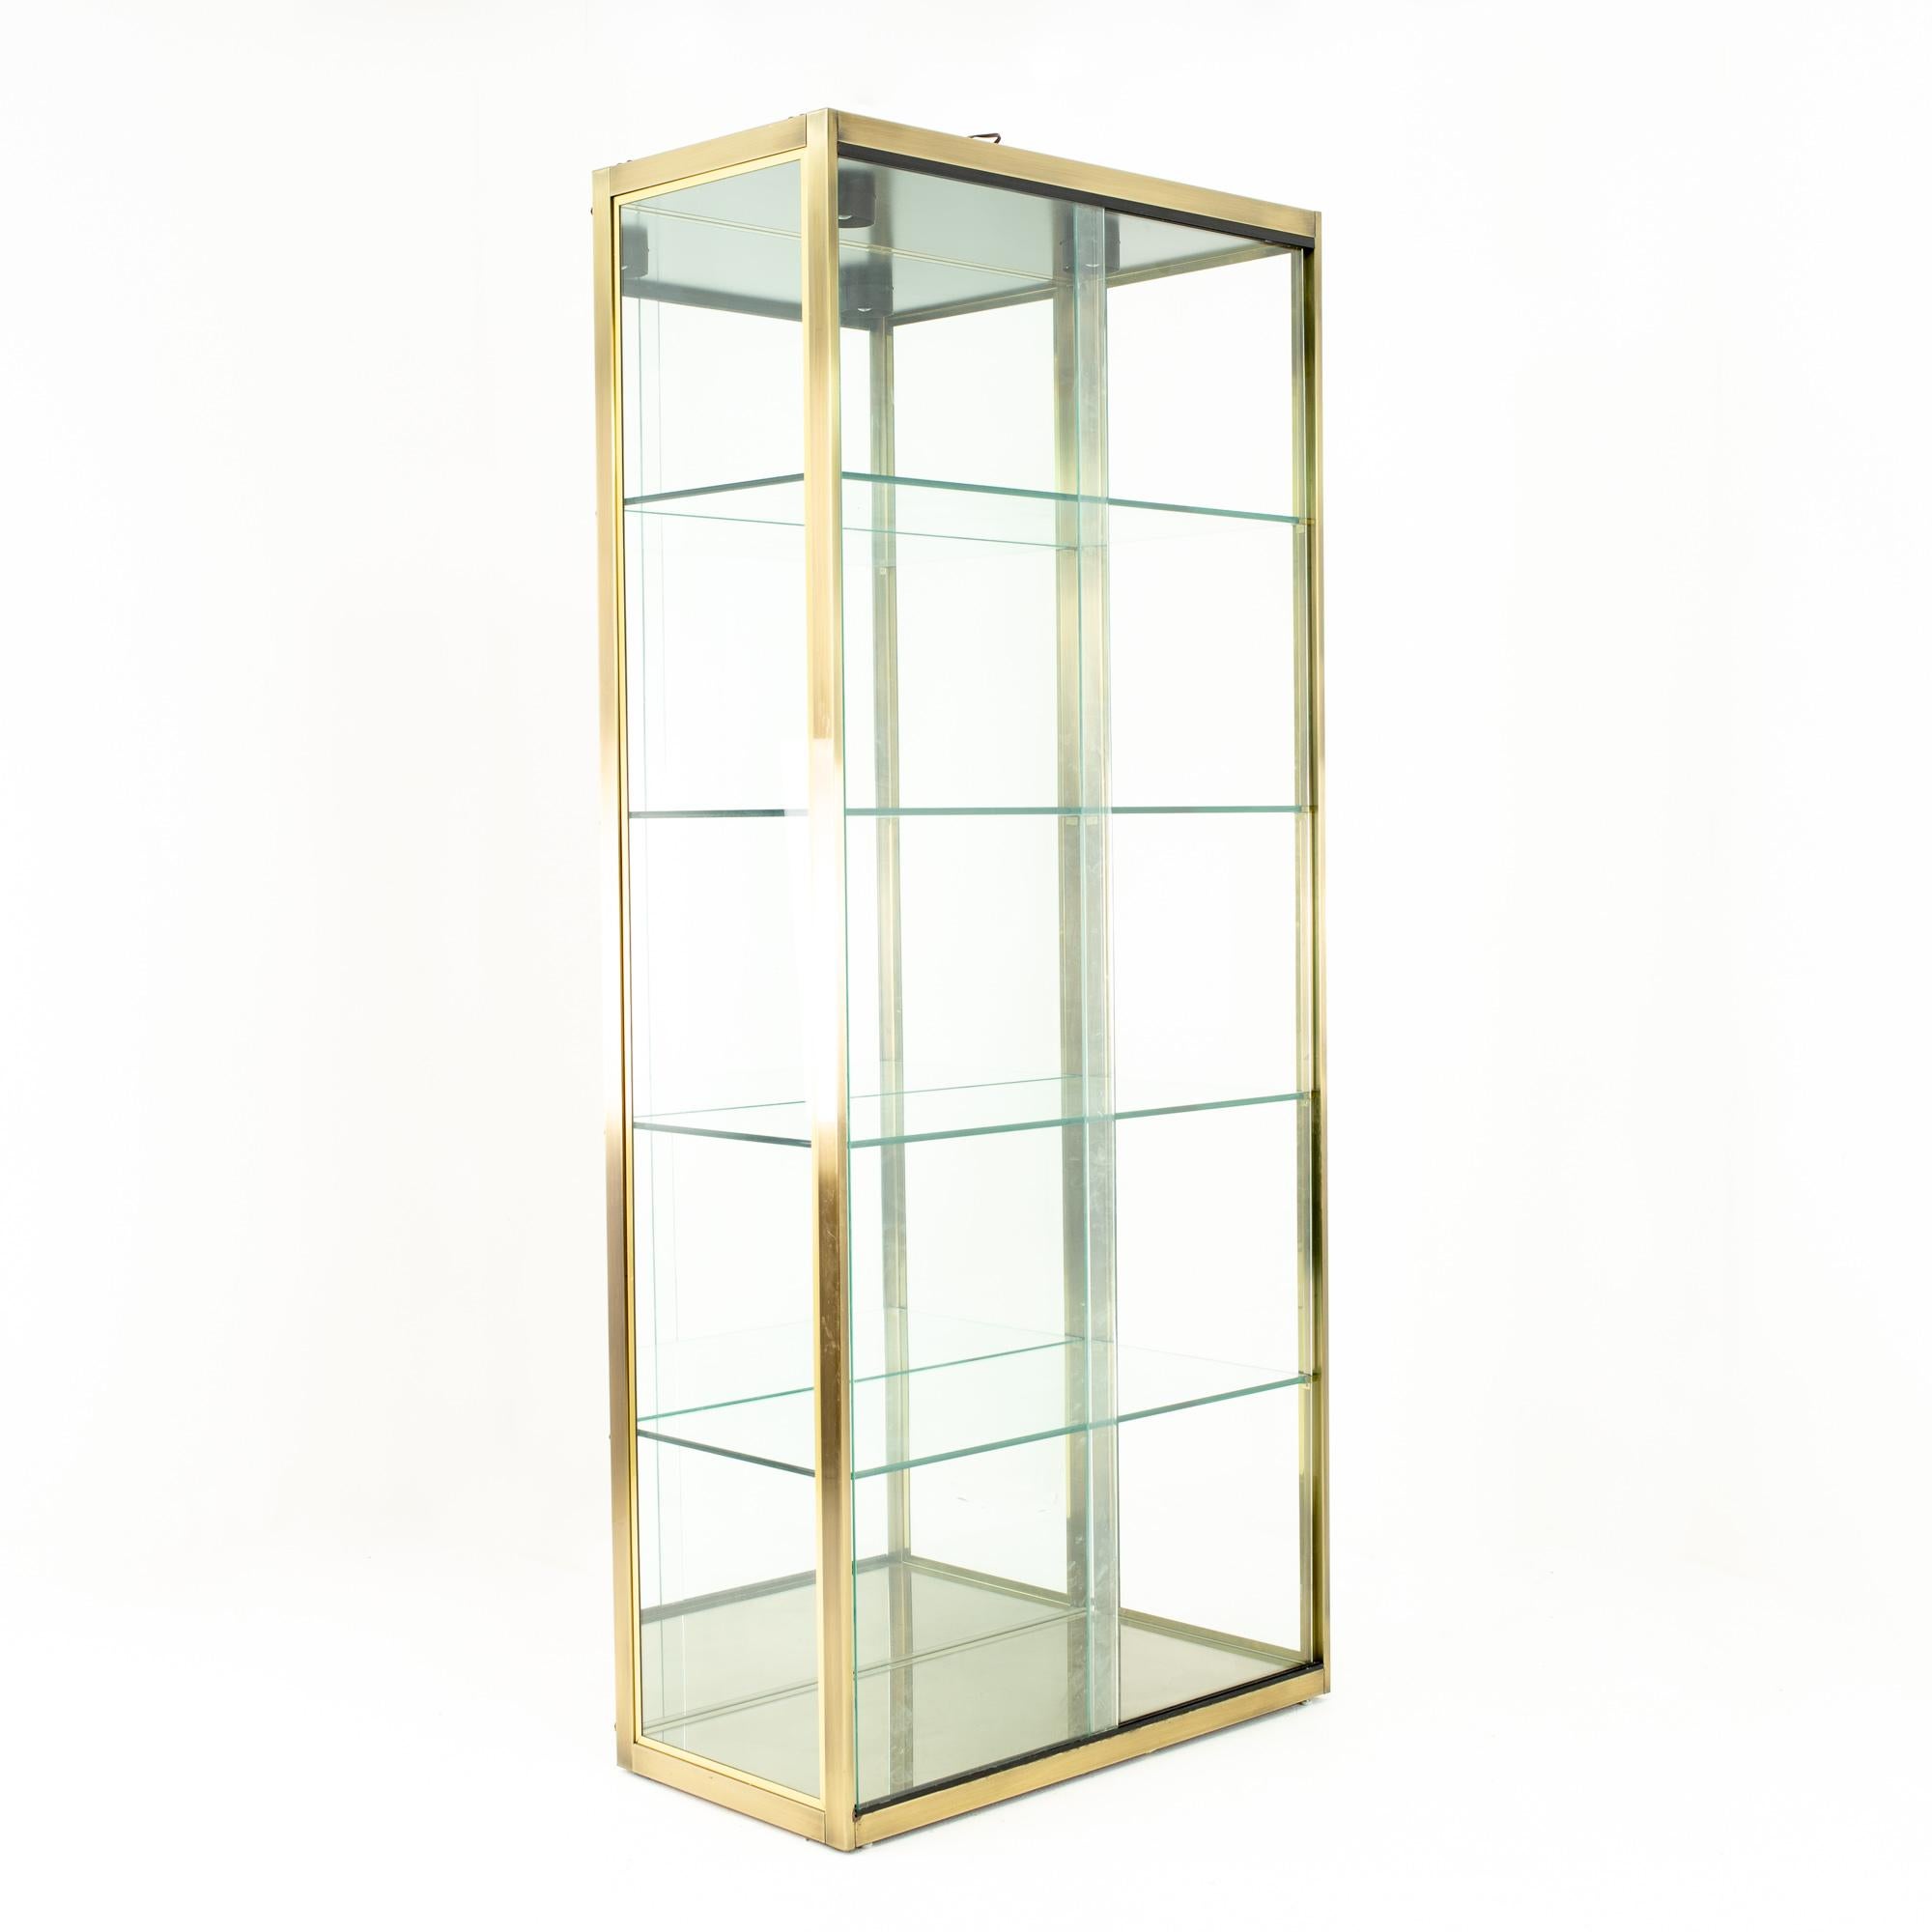 Design Institute of America midcentury brushed brass and glass display case

Display case measures: 36 wide x 18.5 deep x 82 high

This price includes getting this piece in what we call restored vintage condition. Upon purchase it is fixed so